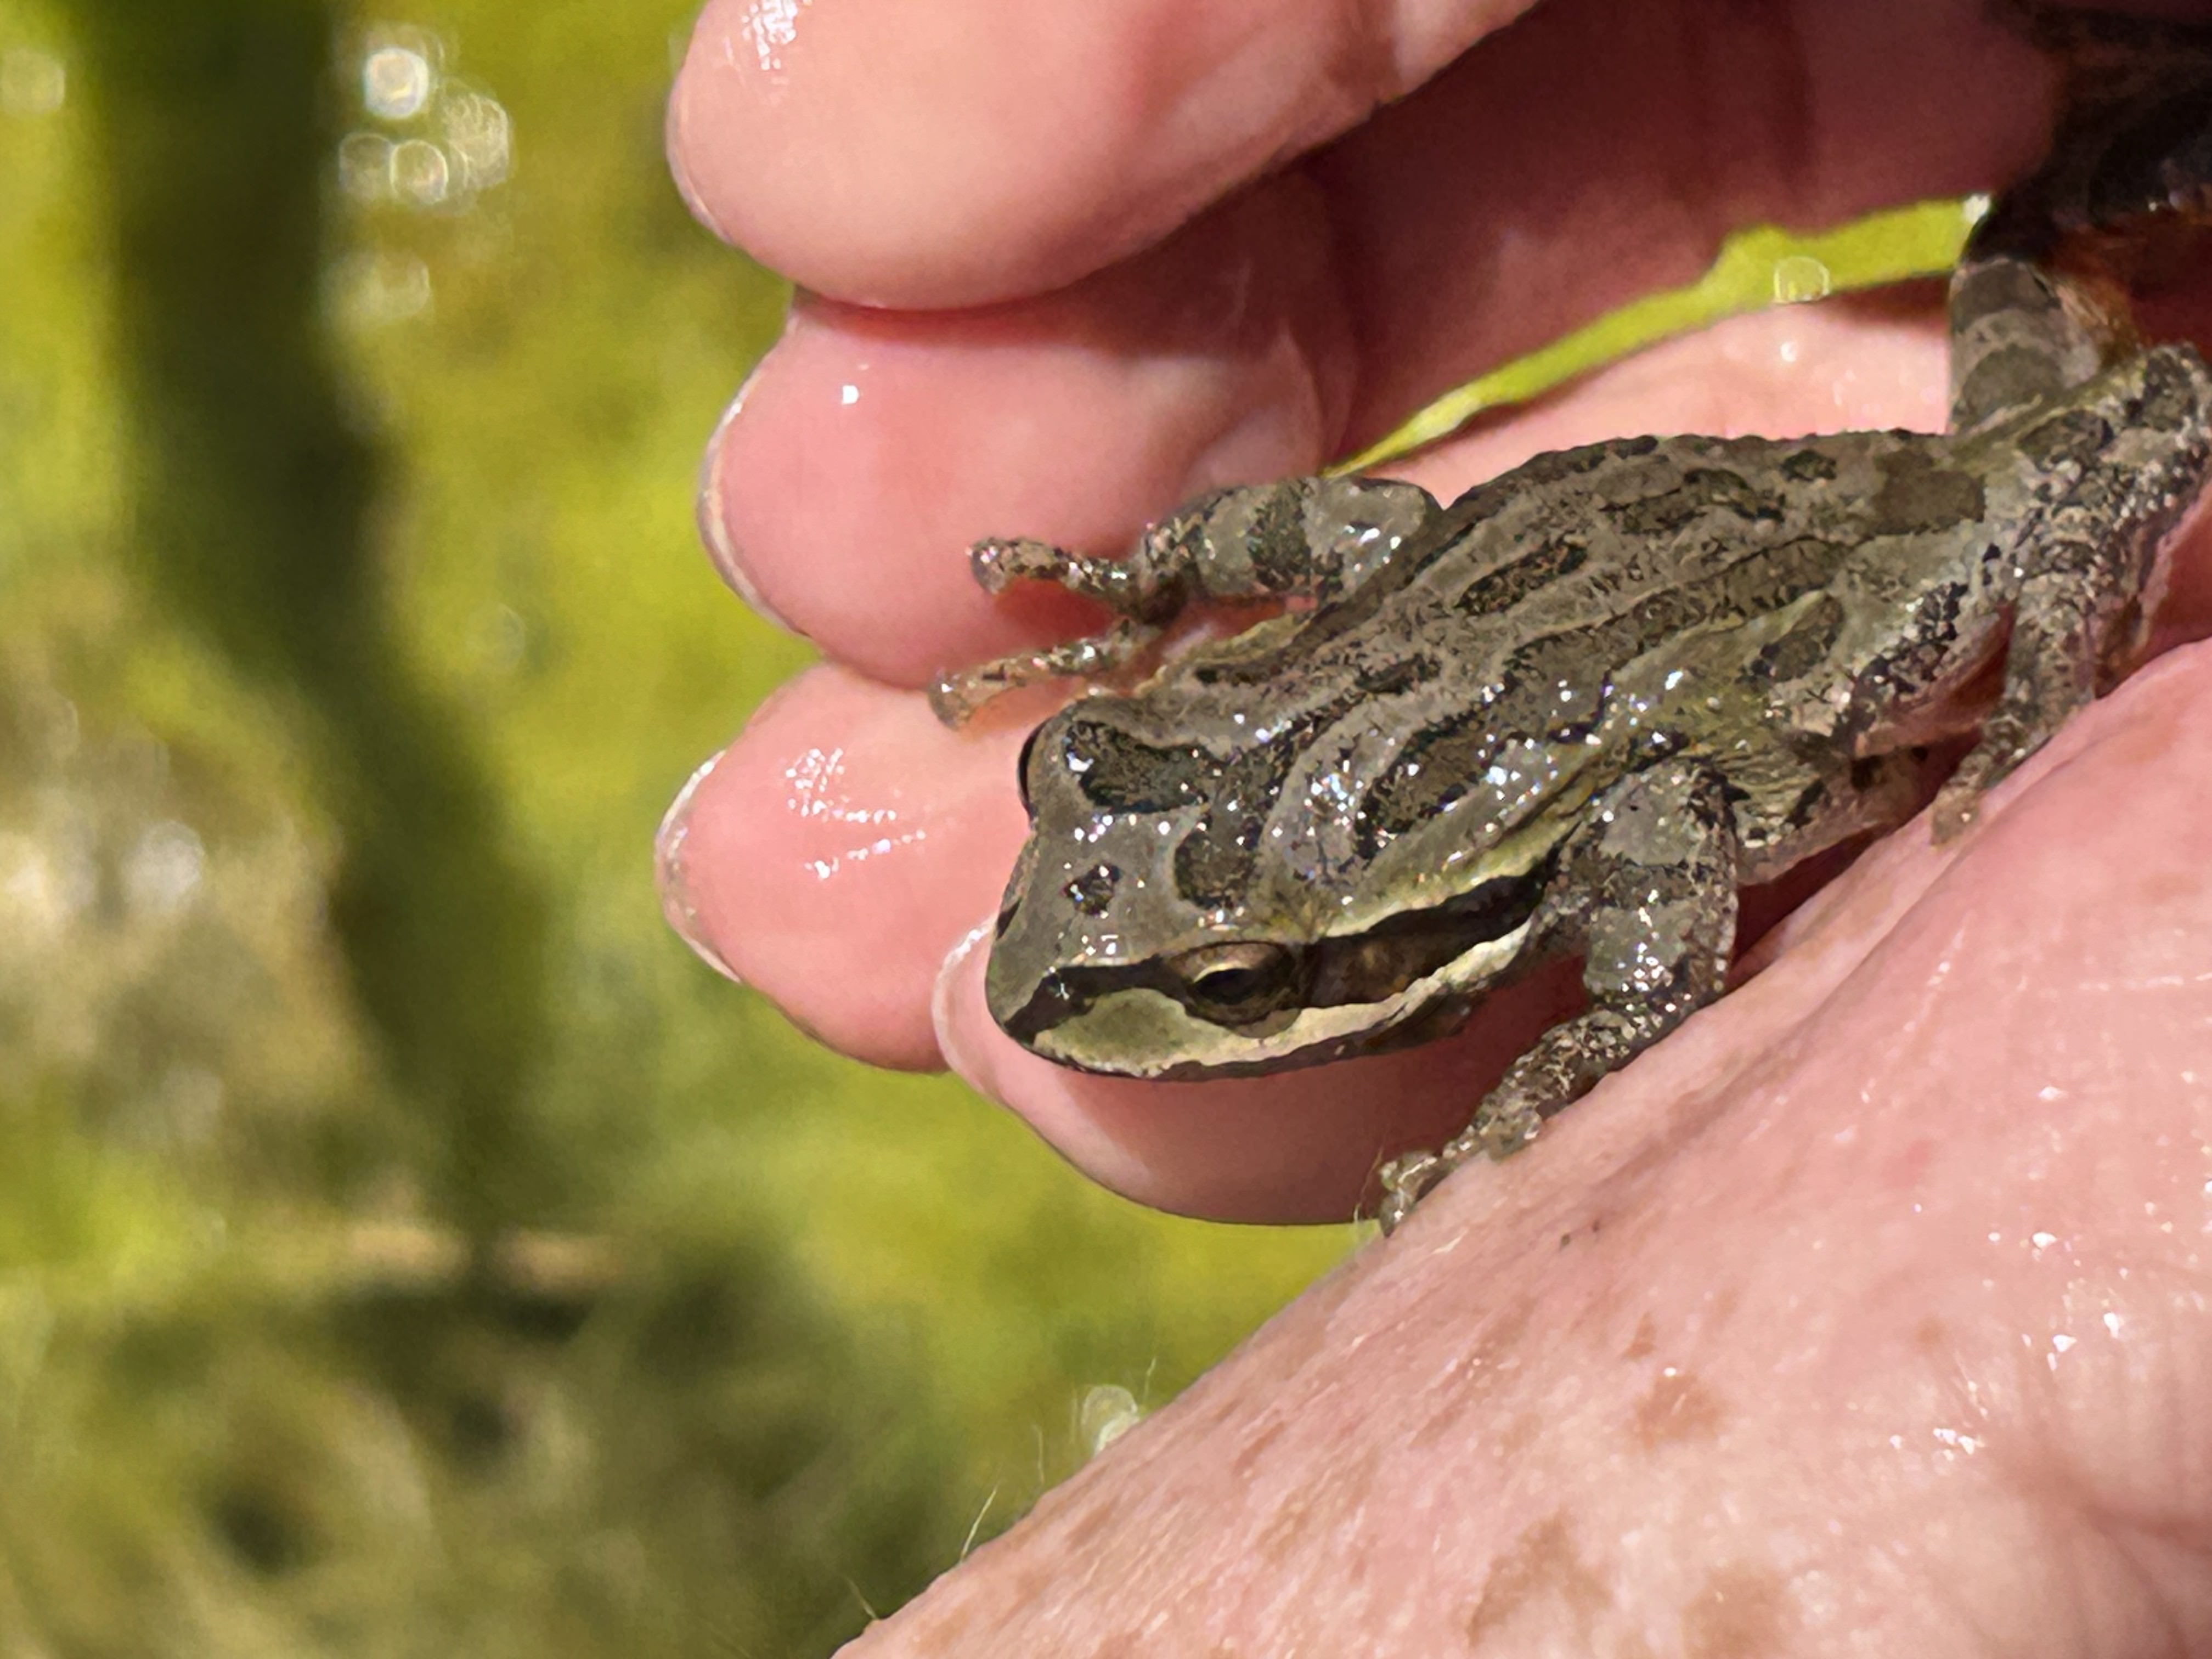 A small green and brown frog held in someone's hand.